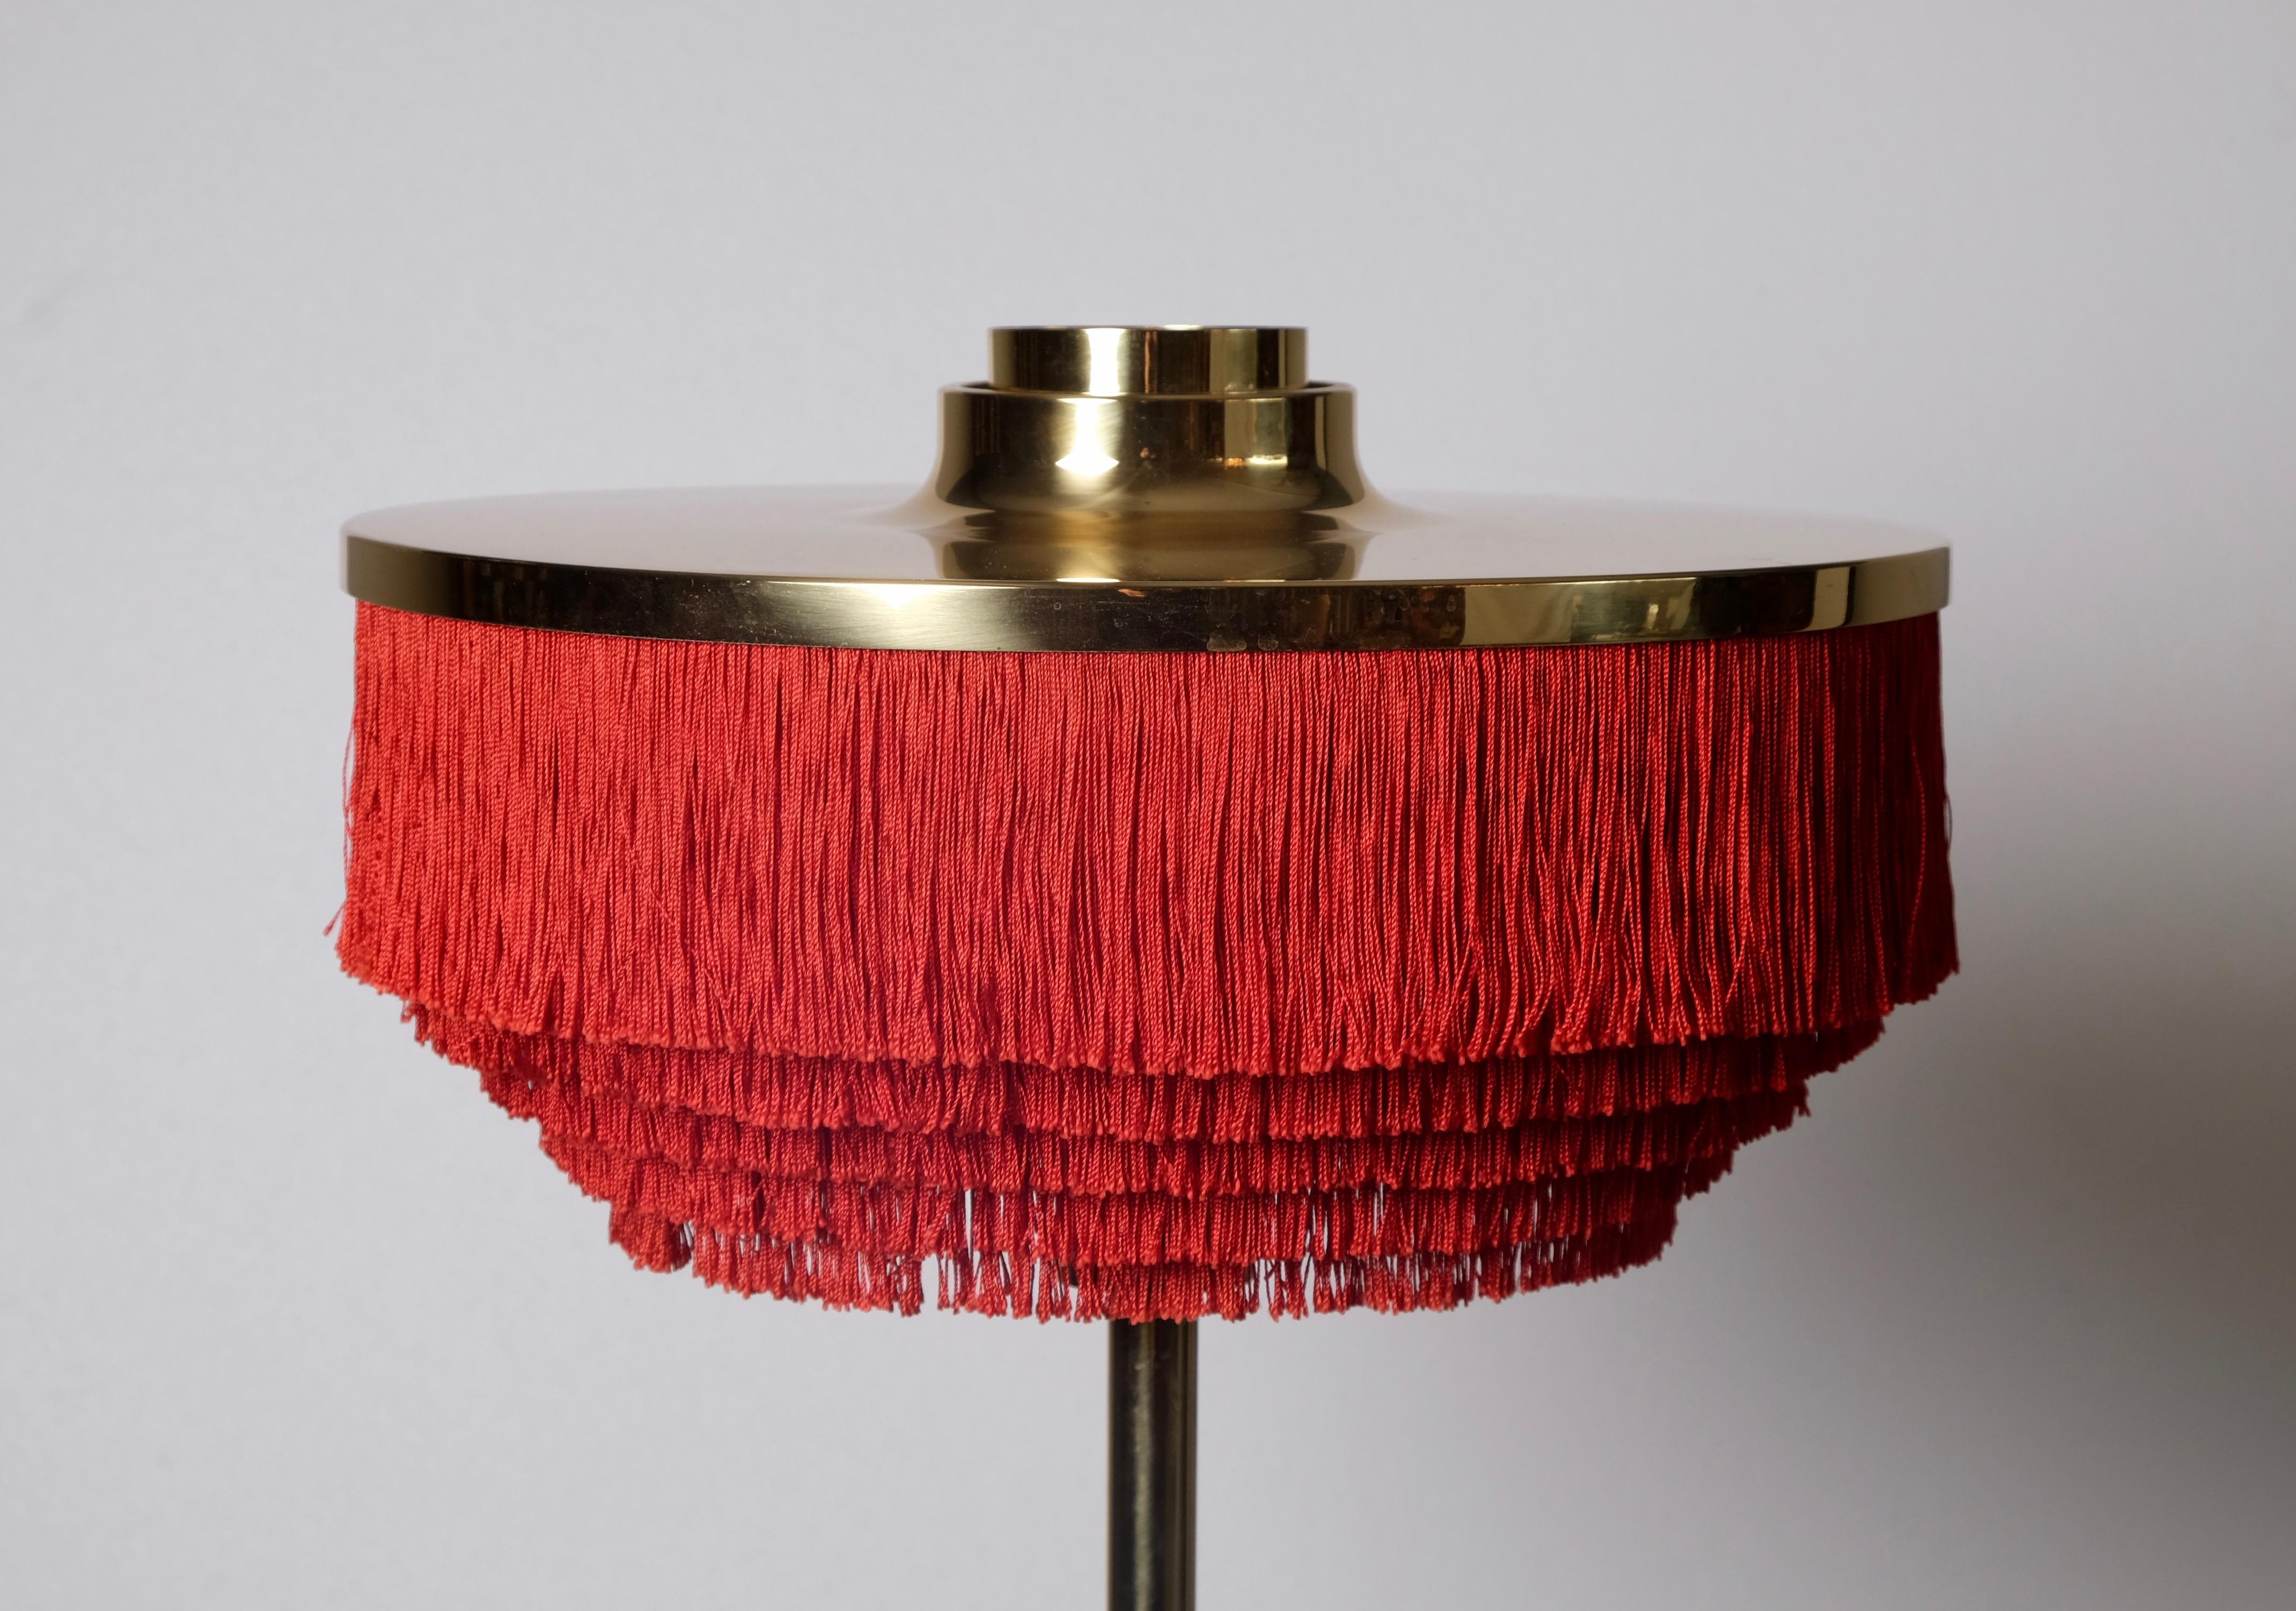 Table lamp with red fringes produced by Hans-Agne Jakobsson in Markaryd, Sweden, 1960s.
New wiring. Excellent condition.